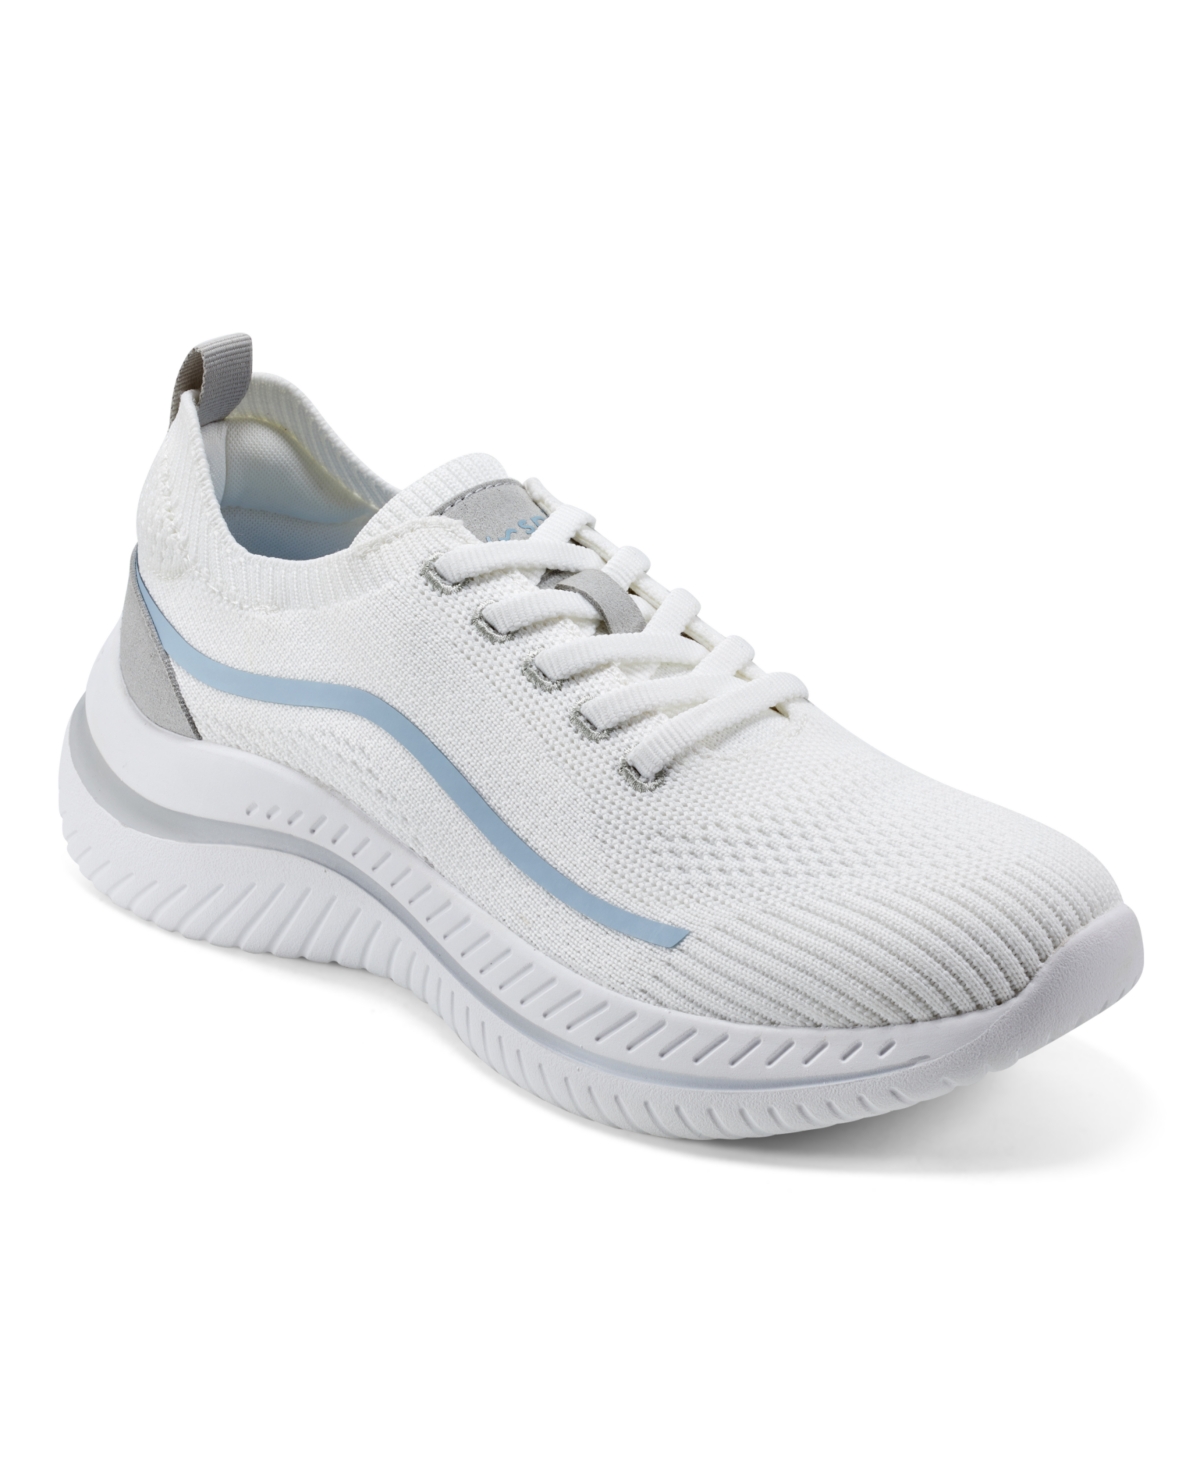 Easy Spirit Women's Gage Lace-up Casual Round Toe Sneakers In White,gray,blue